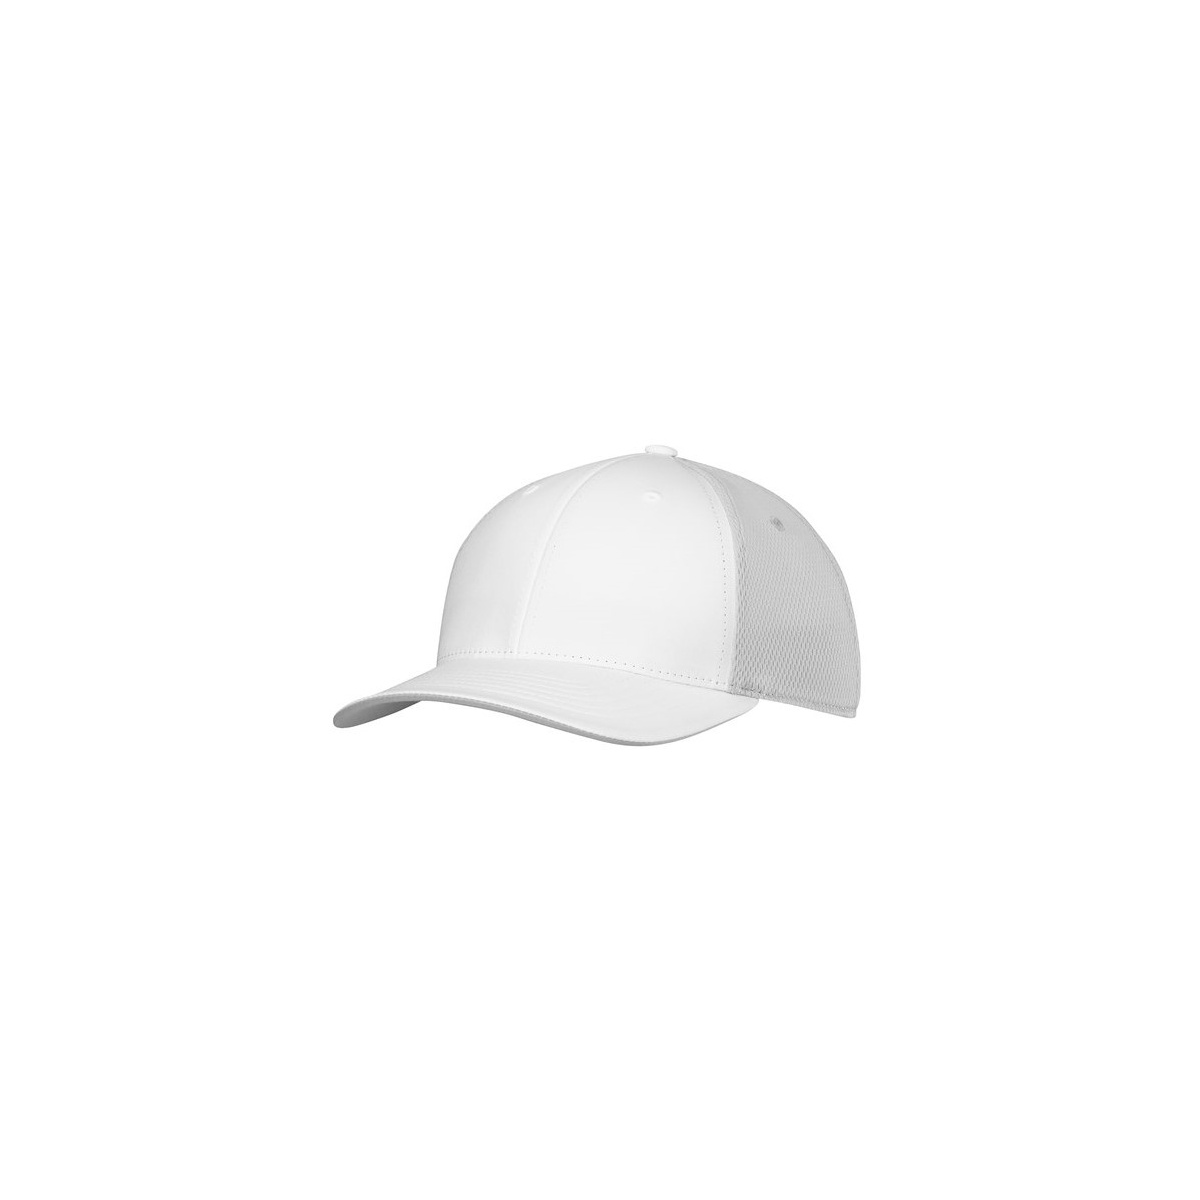 Mar Polvoriento esqueleto Casquette Baseball Climacool Blanche- Adidas Reference : 10686 |  Chapellerie Traclet